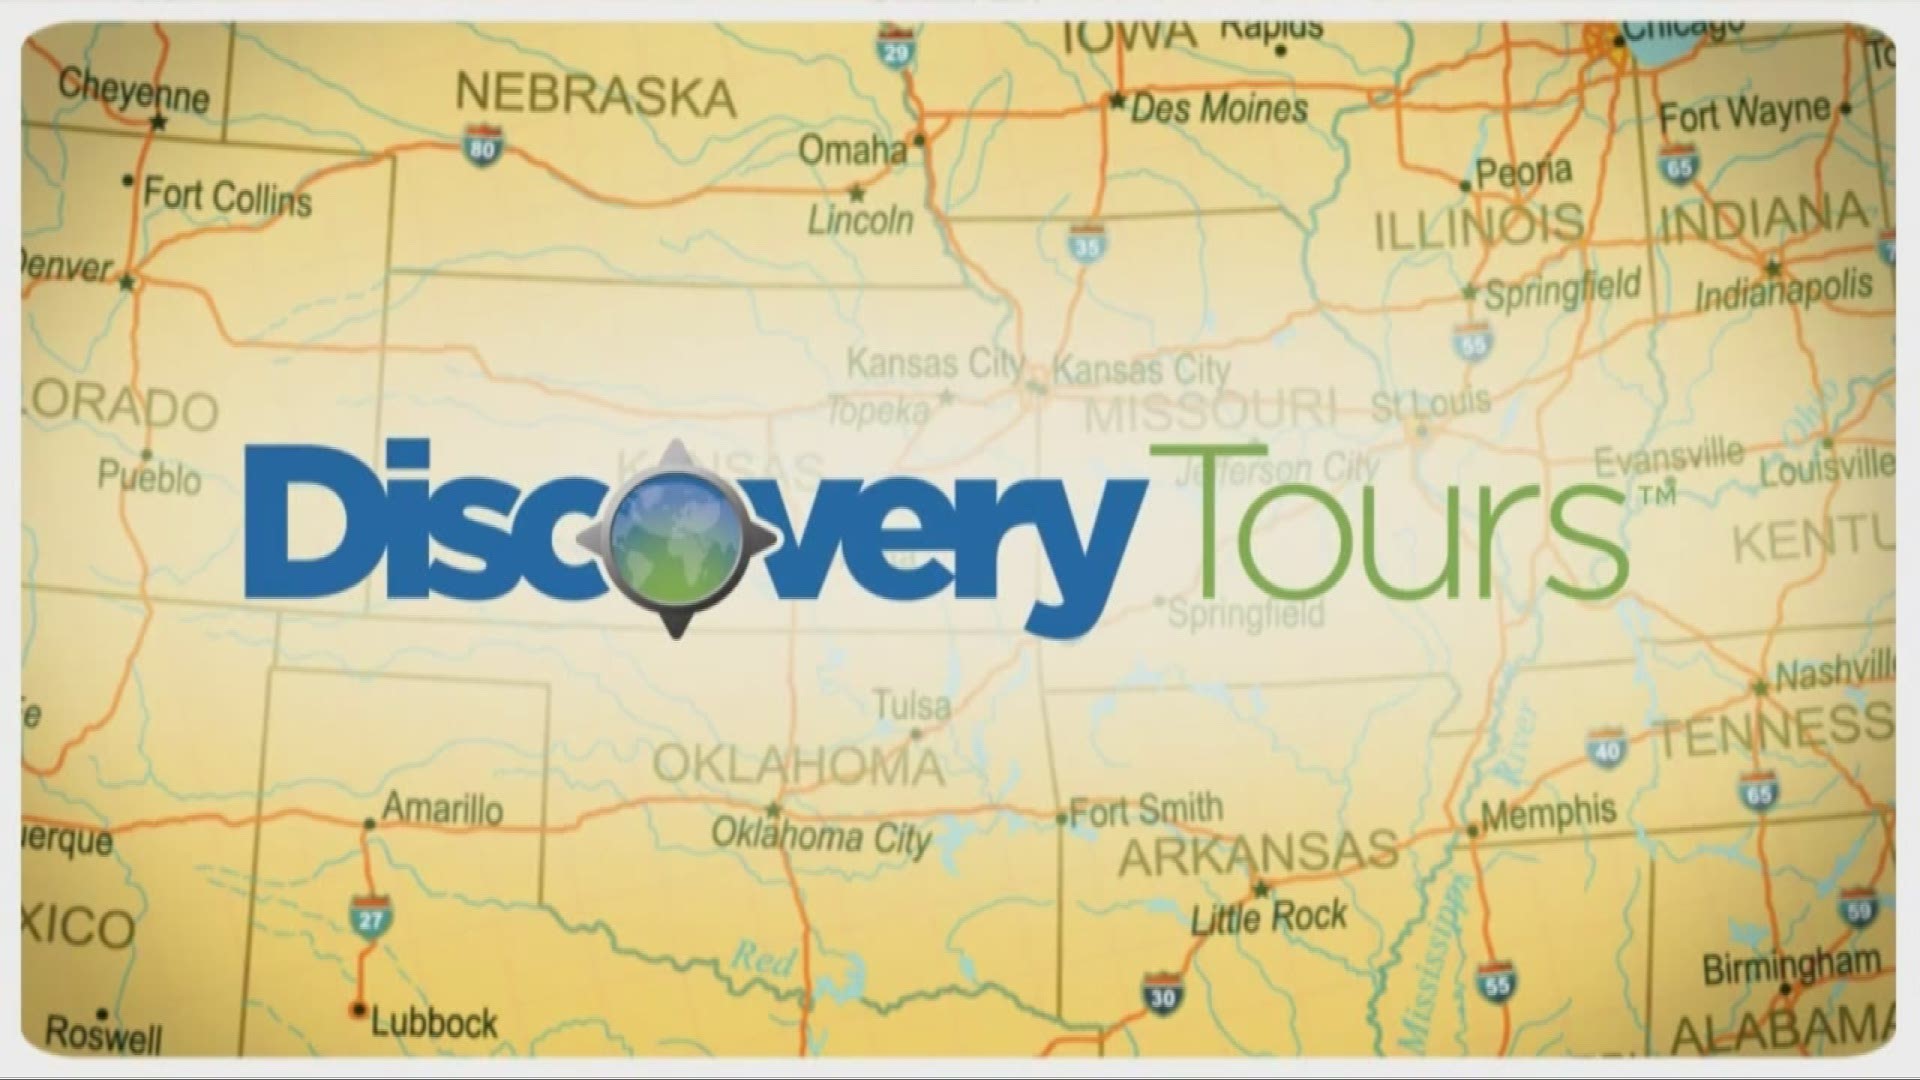 Complaints continue to roll in about Discovery Tours, state and county governments investigating